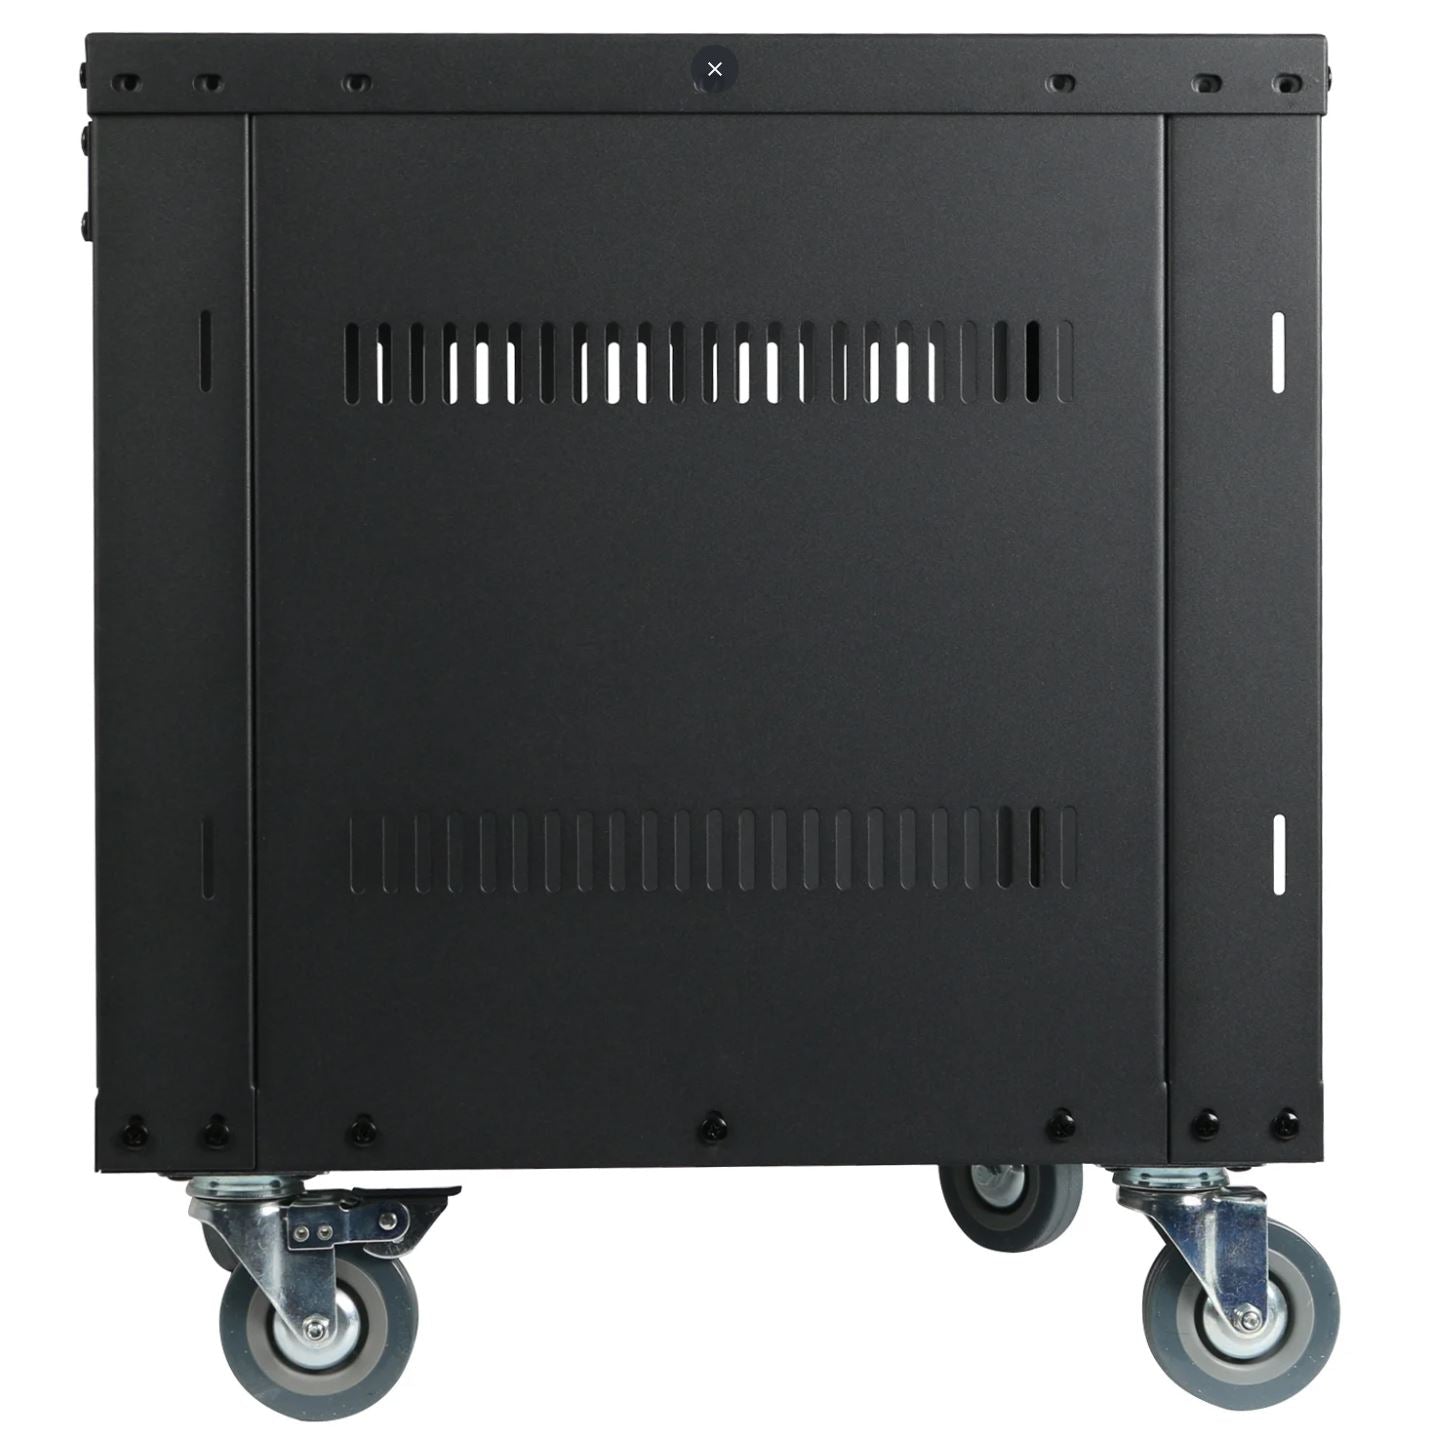 Samson SRK8 Universal Equipment 8 Rack Stand Heavy Duty Steel Construction with Caster Wheels, Fully Enclosed Sides